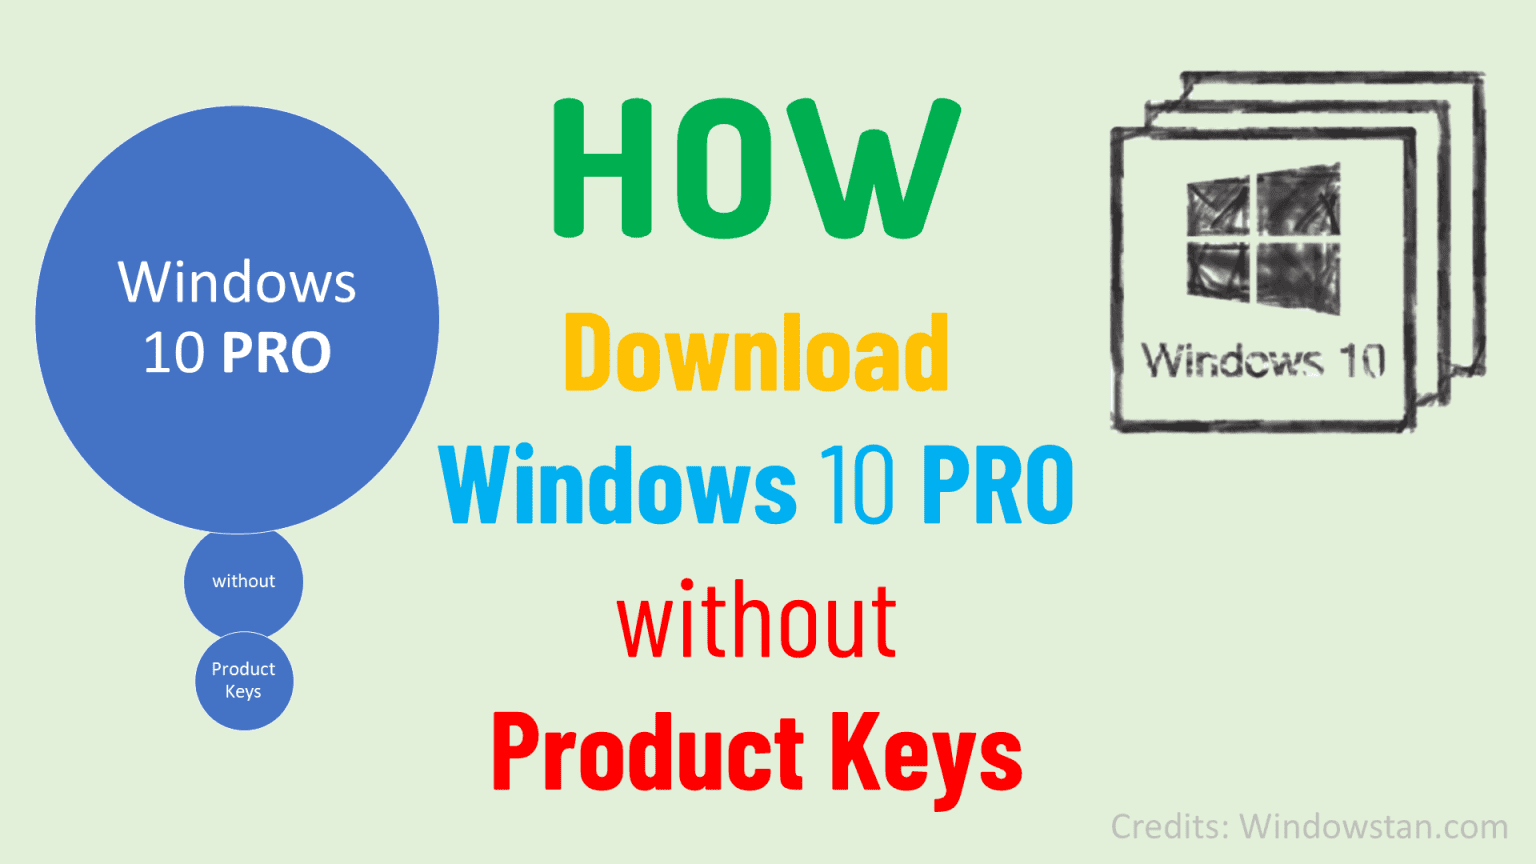 windows 10 pro iso file download 64 bit highly compressed